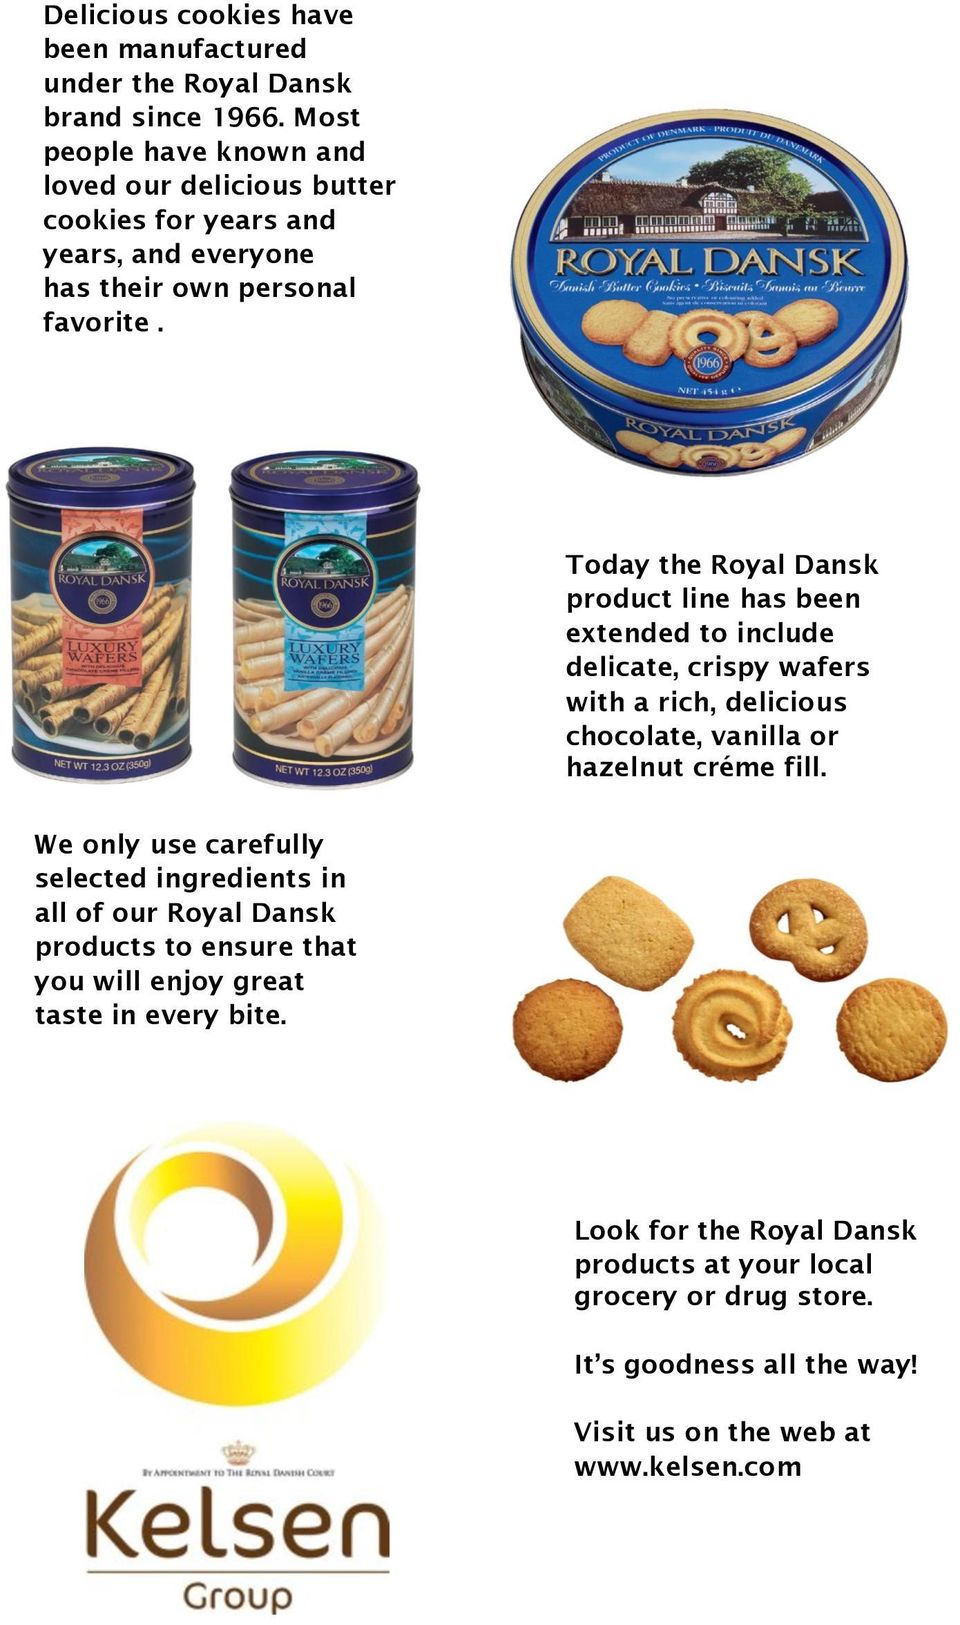 Today the Royal Dansk product line has been extended to include delicate, crispy wafers with a rich, delicious chocolate, vanilla or hazelnut créme fill.